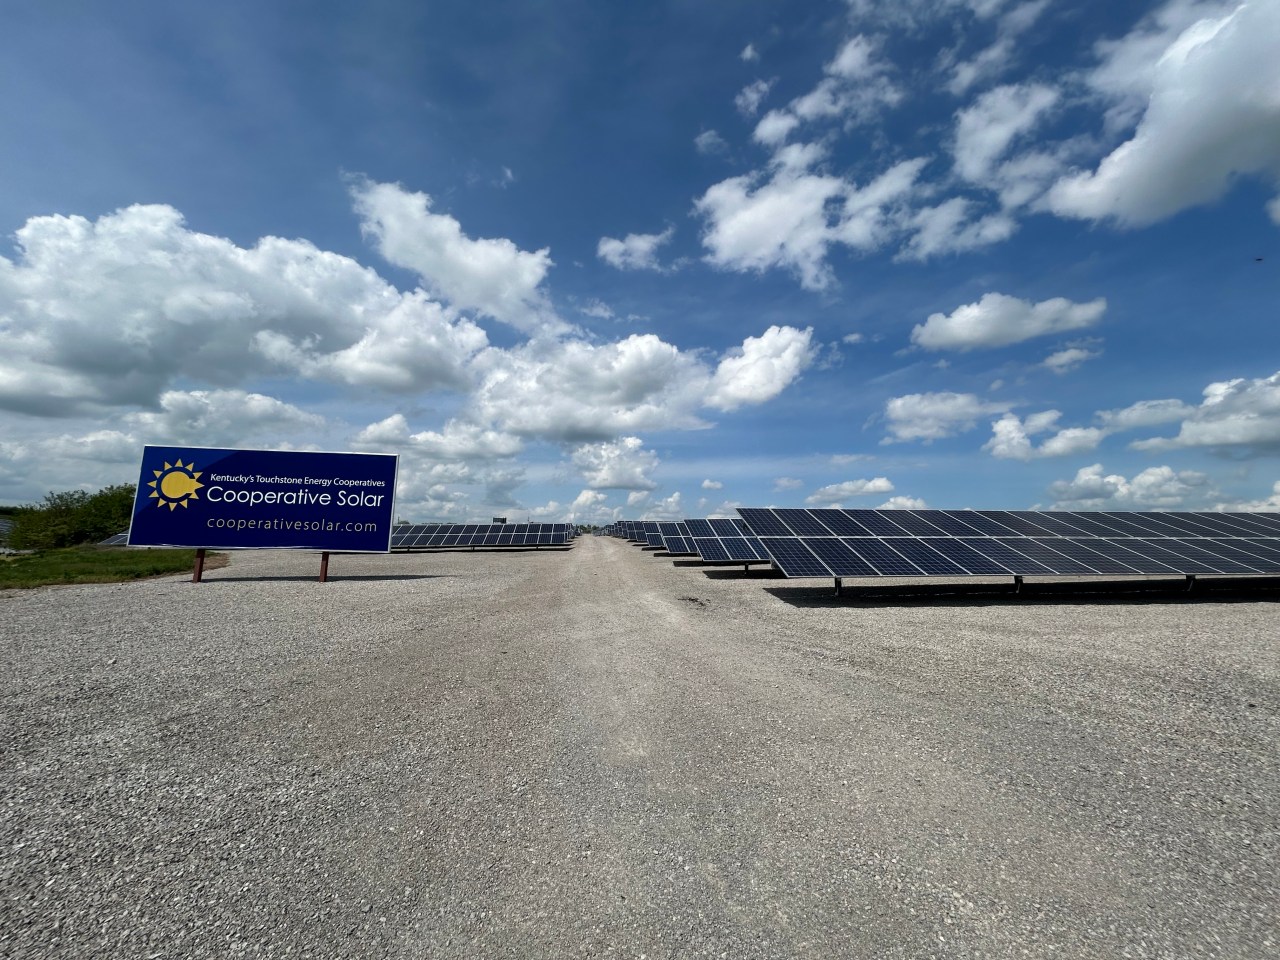 Winchester power provider makes plans to expand solar power operations [Video]